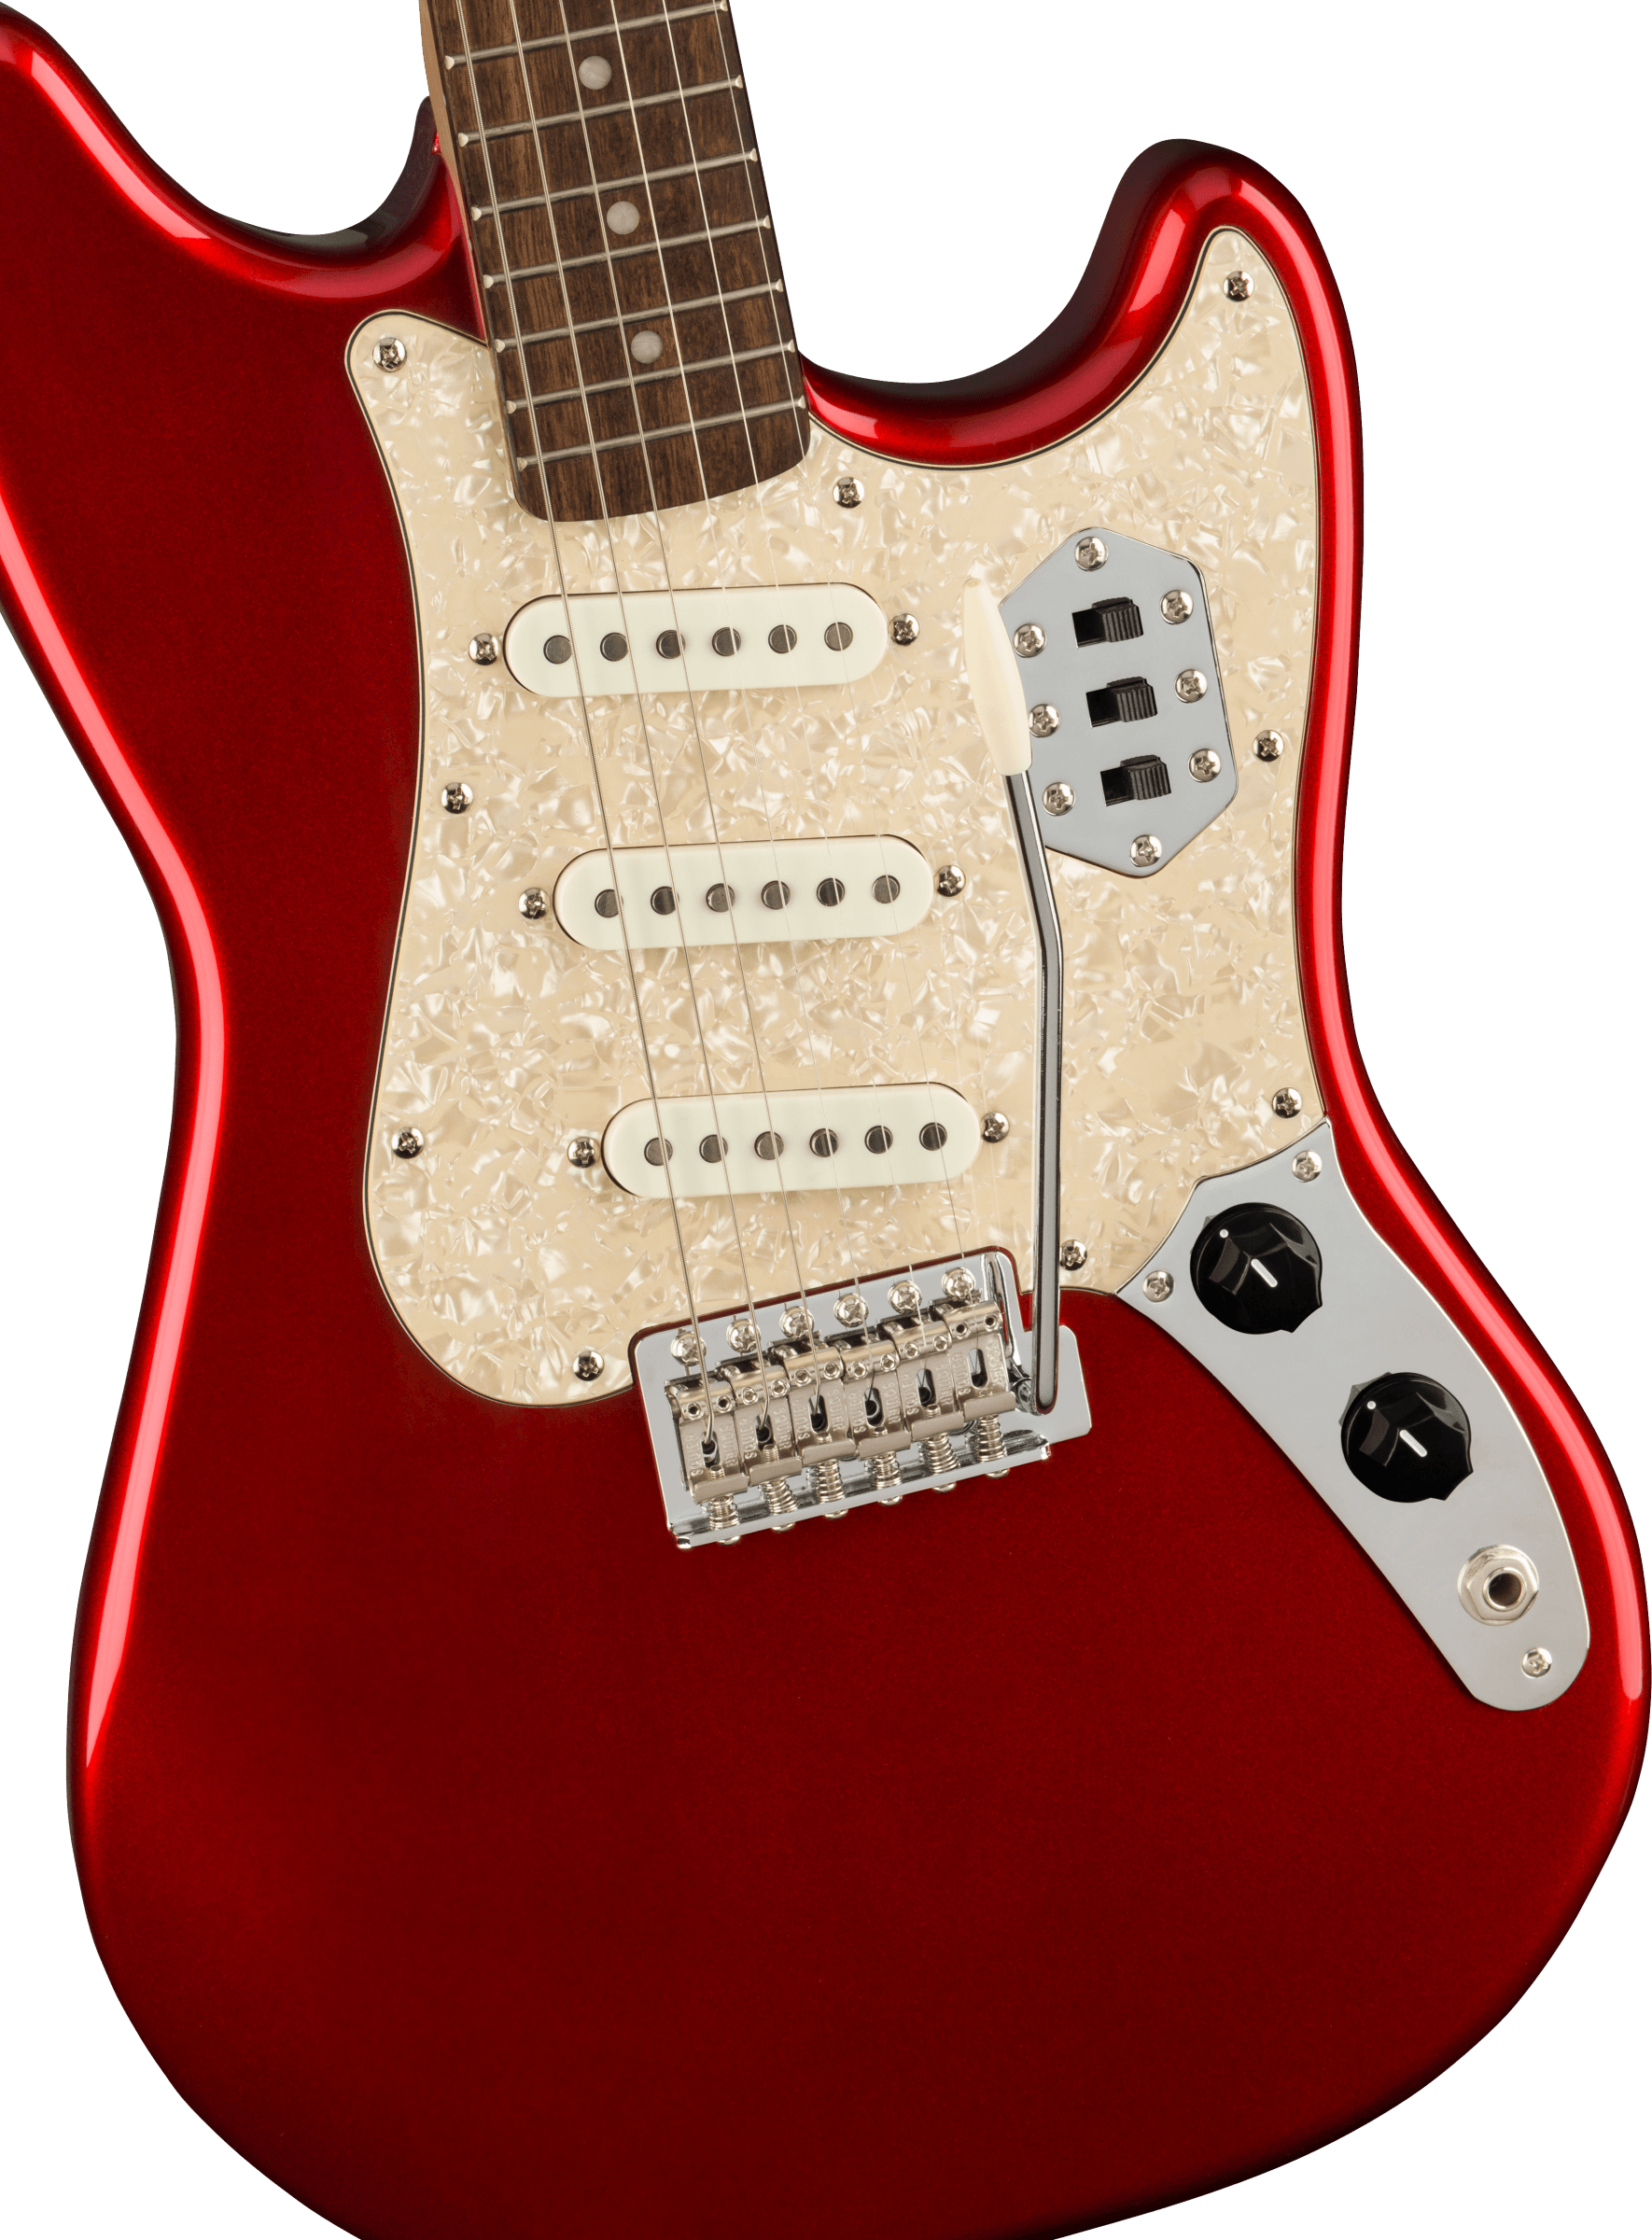 Squier Cyclone Paranormal 3s Trem Lau - Candy Apple Red - Retro rock electric guitar - Variation 2